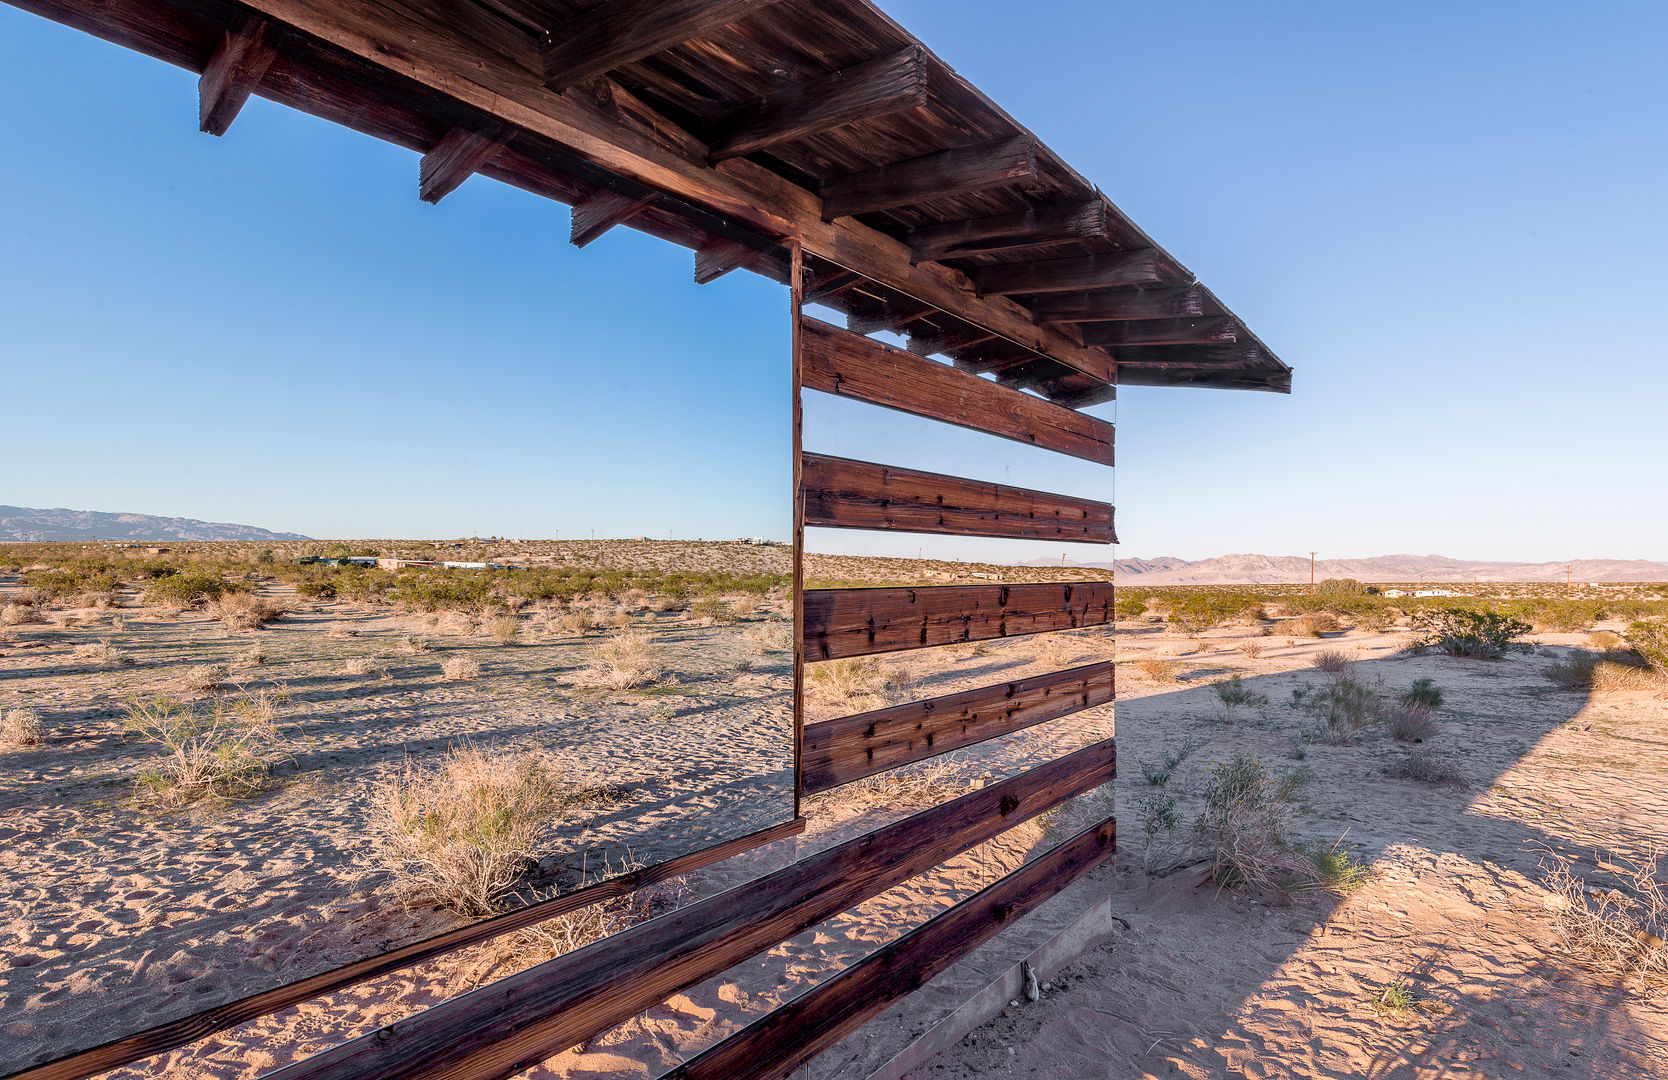 Lucid Stead, royale projects : contemporary art royale projects : contemporary art خانه ها